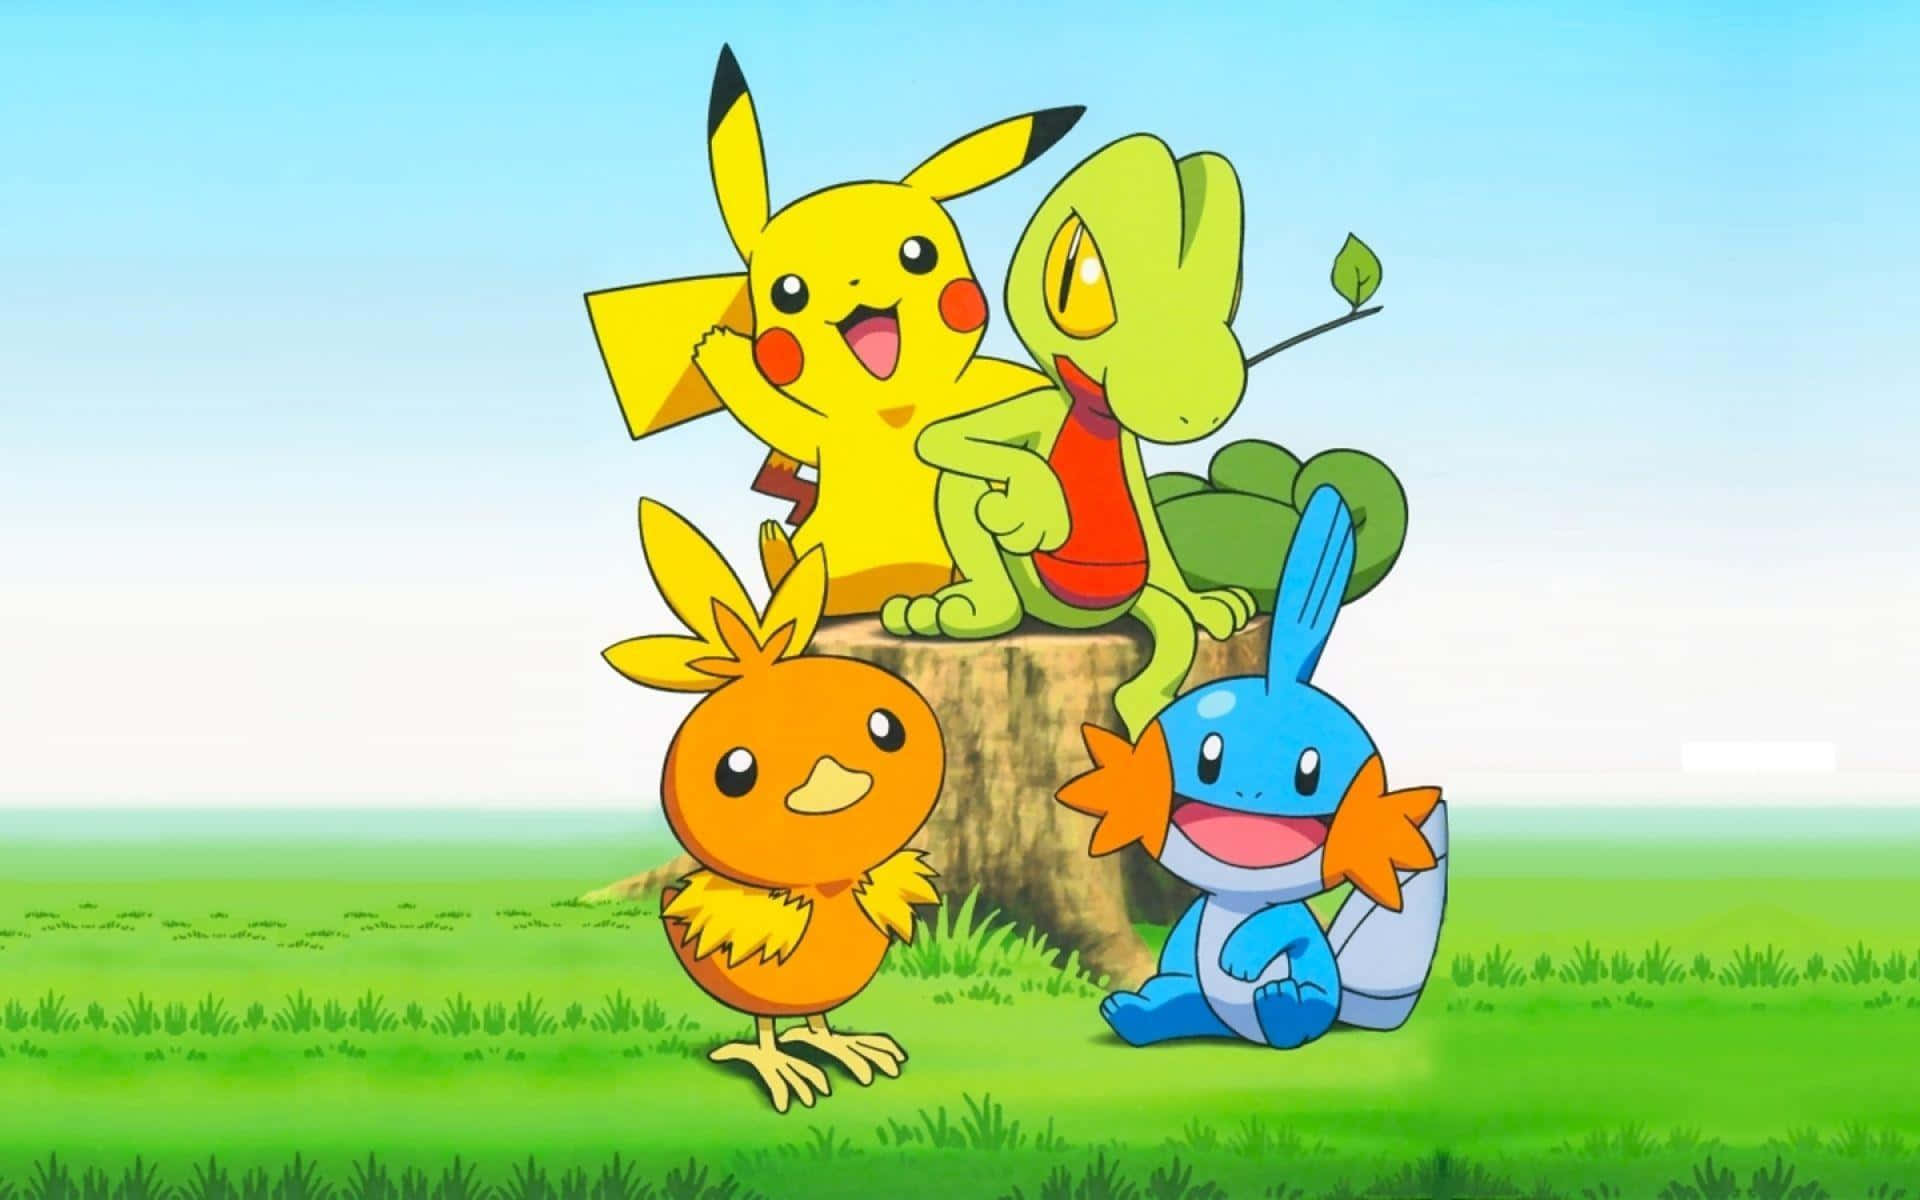 Get Ready for an Exciting Adventure with Pikachu!